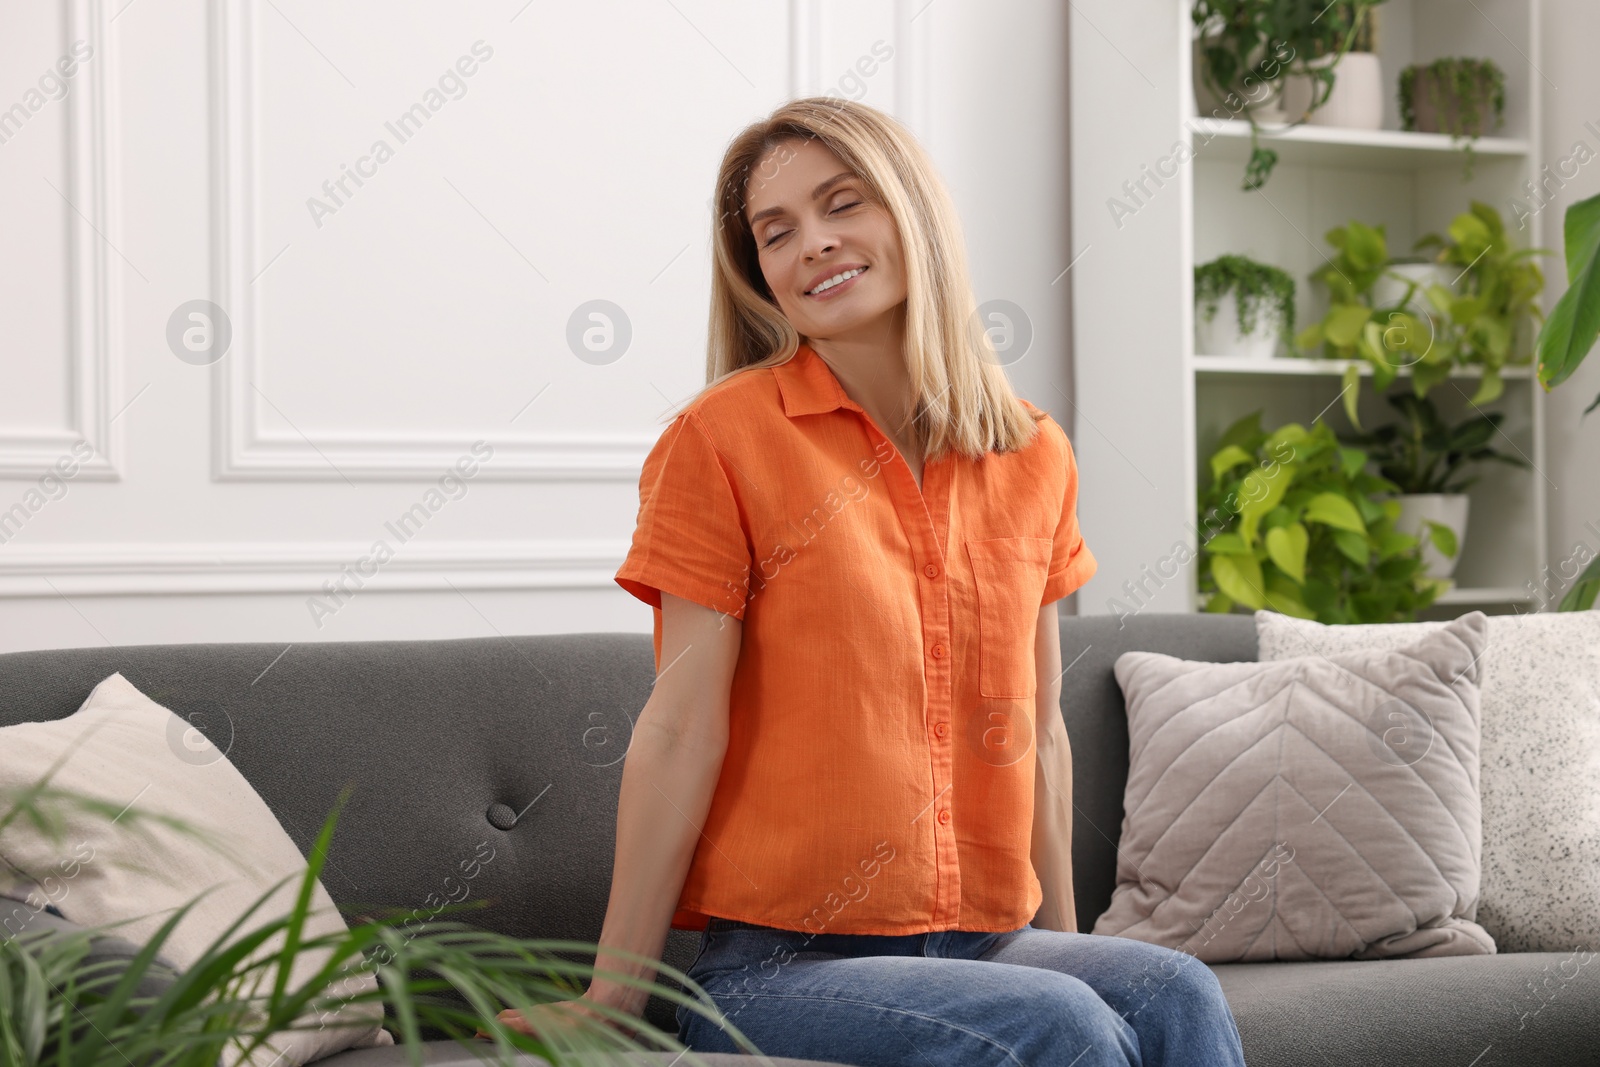 Photo of Woman sitting on sofa in room with beautiful houseplants